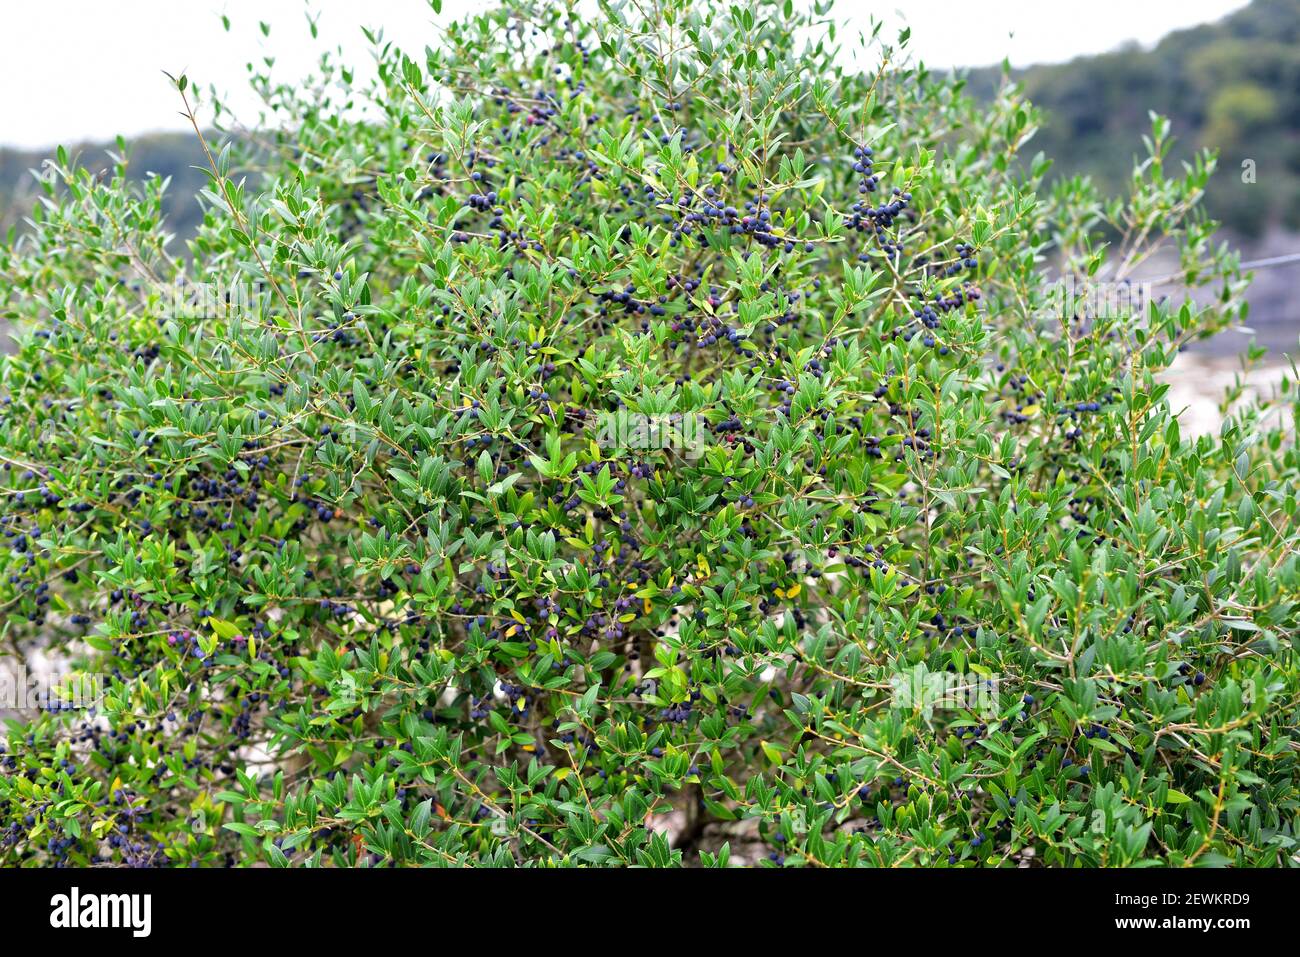 Narrow-leaved mock privet (Phillyrea angustifolia) is an evergreen shrub native to western Mediterranean region: Spain, Portugal, France, Italy and Stock Photo